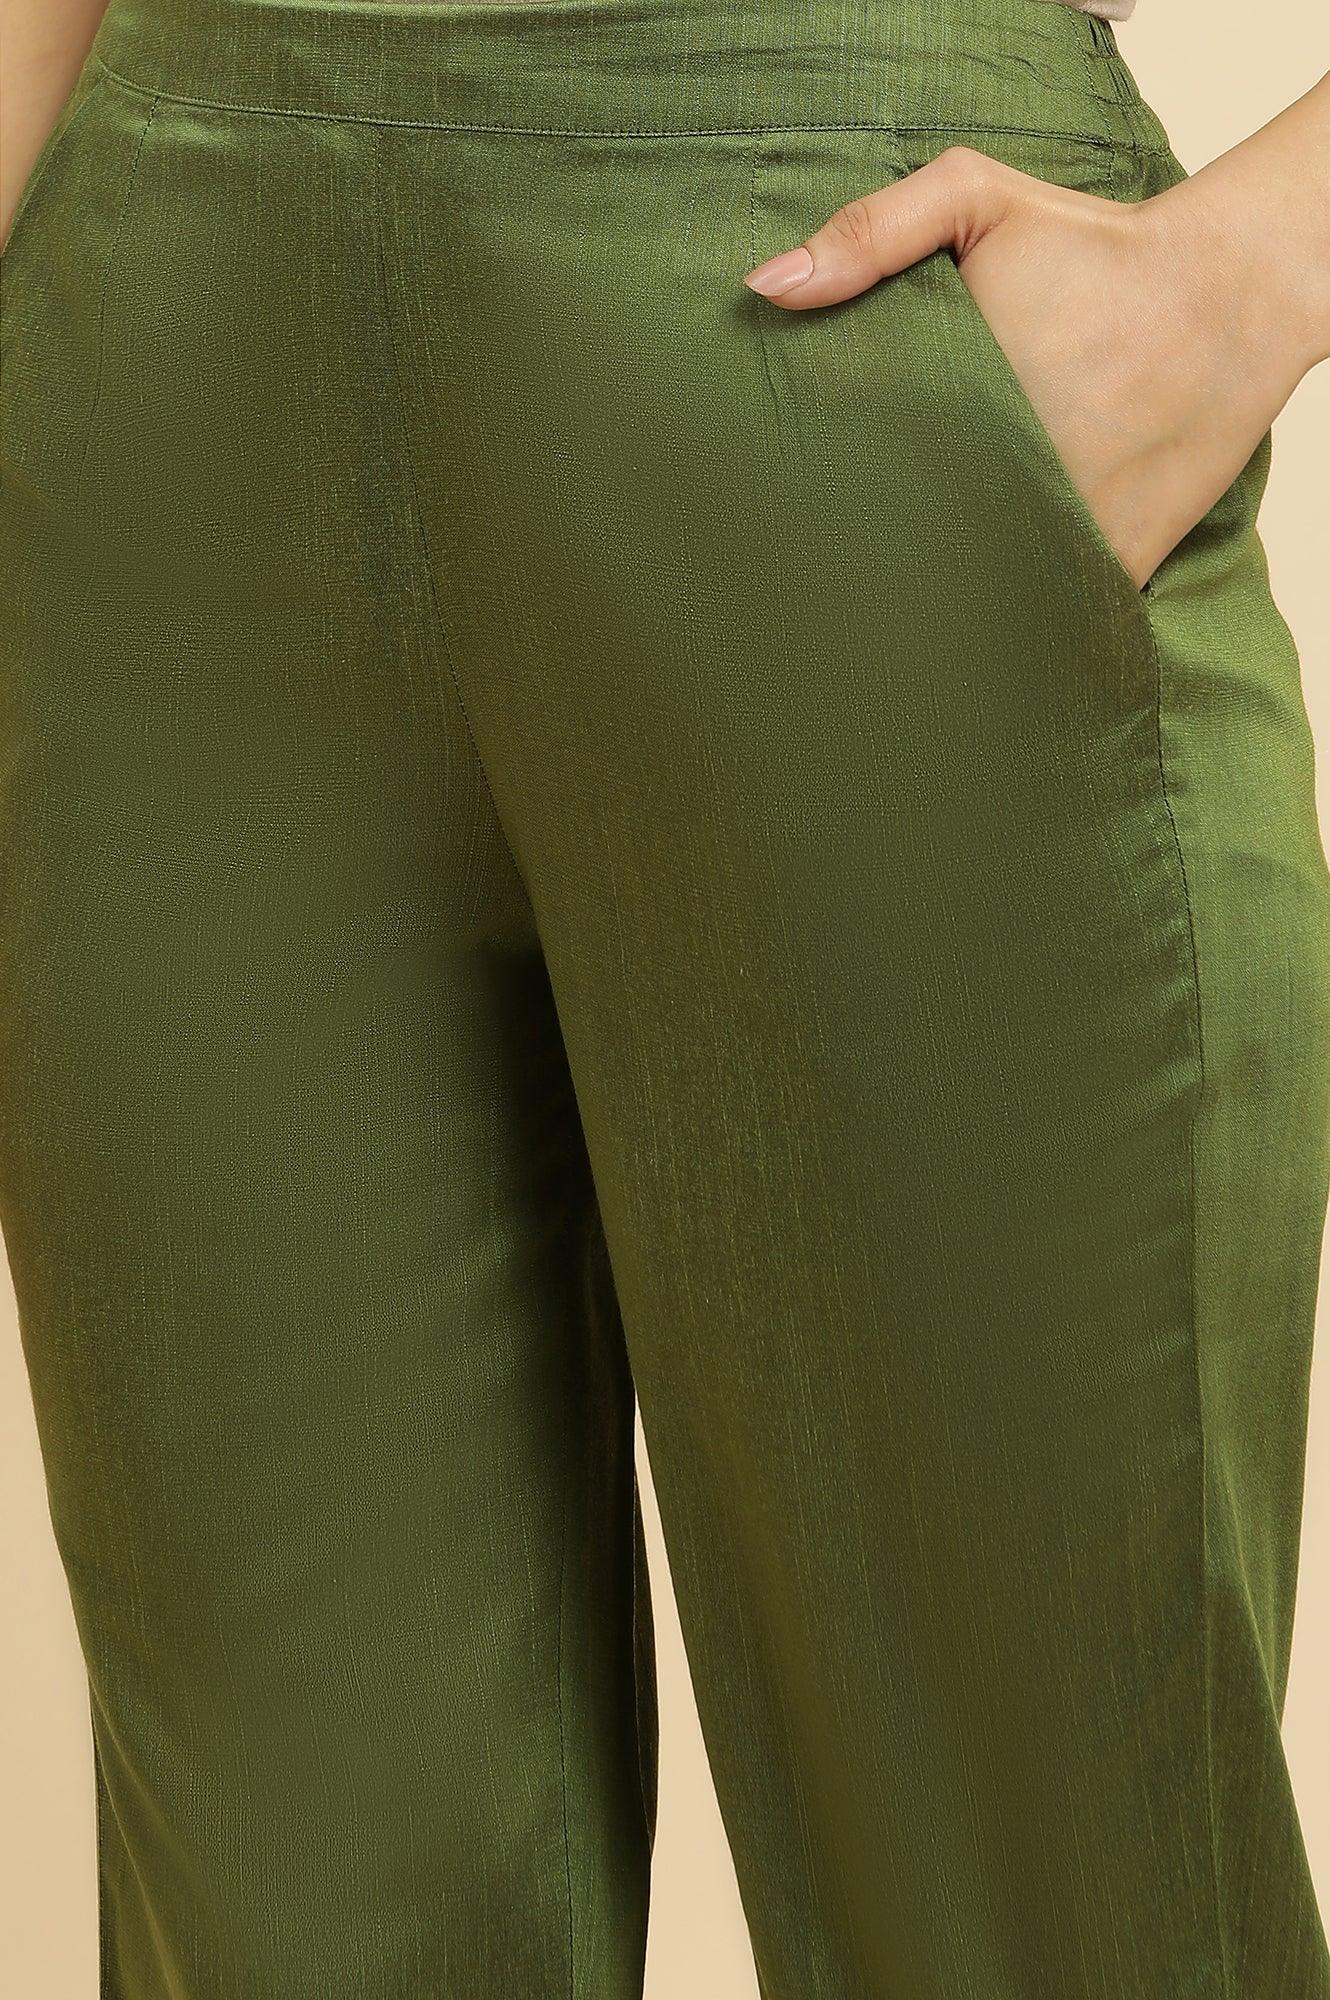 Olive Green Straight Pants With Embroidered Hemline - wforwoman